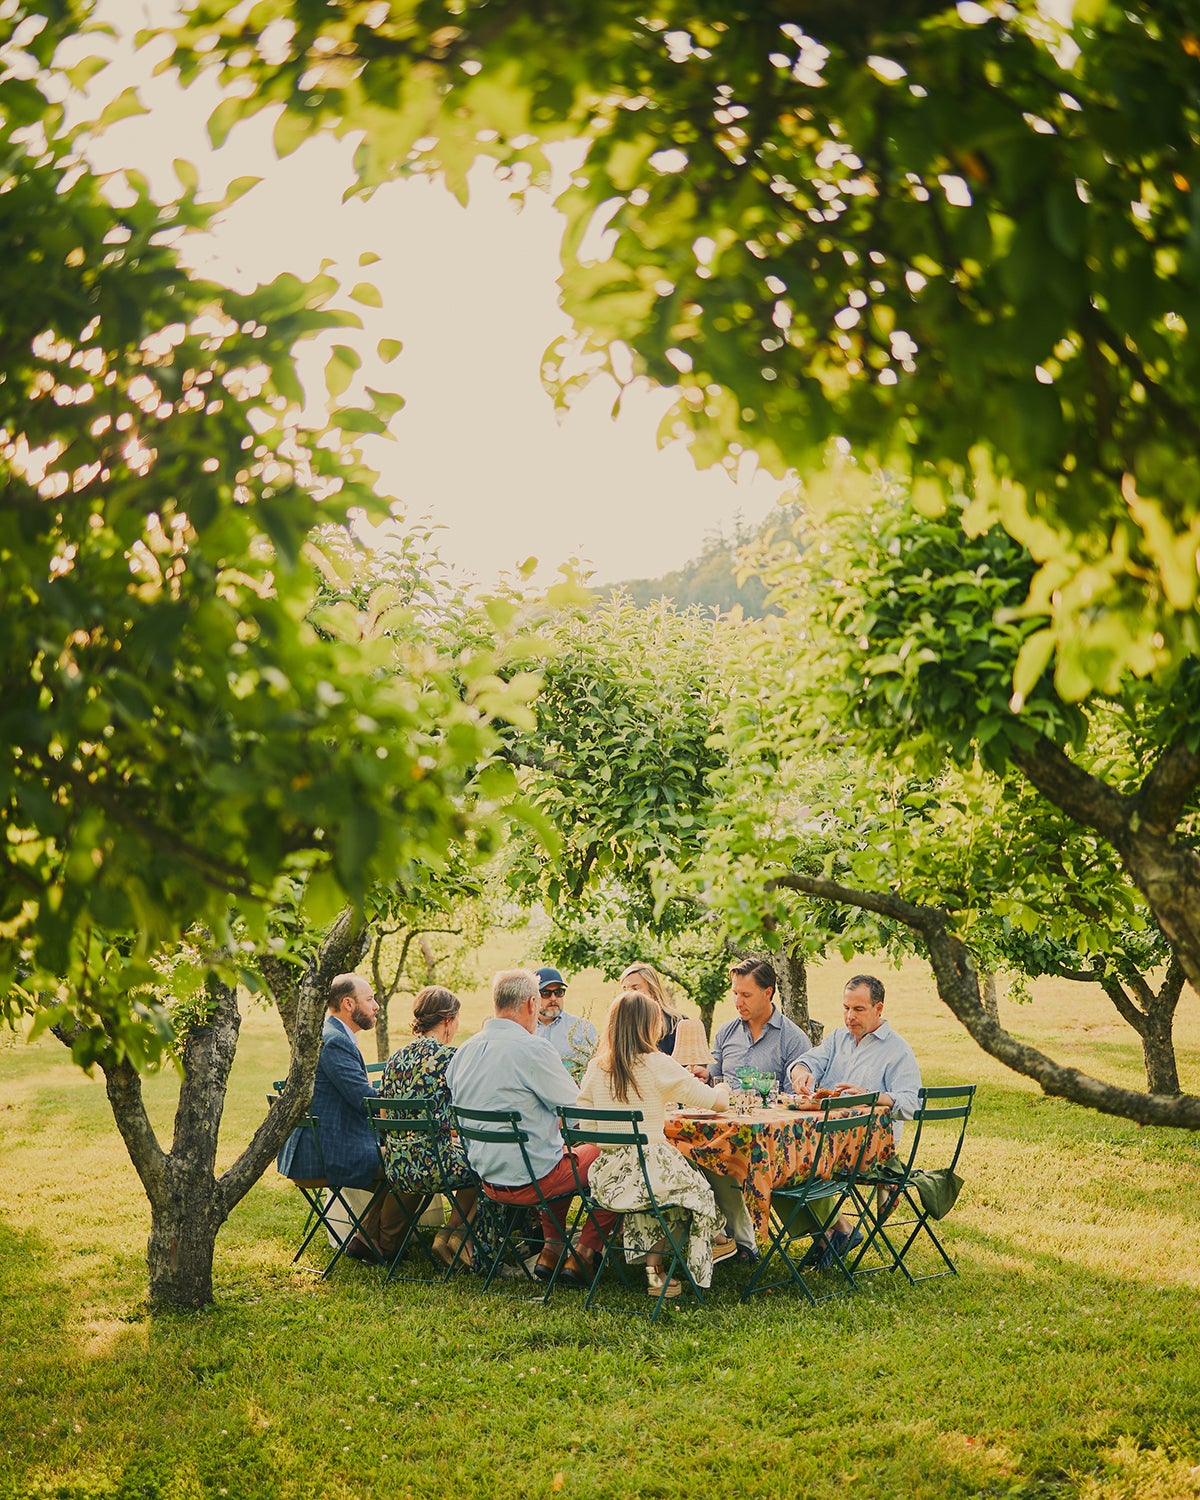 Guests dining at a table in a grove of trees